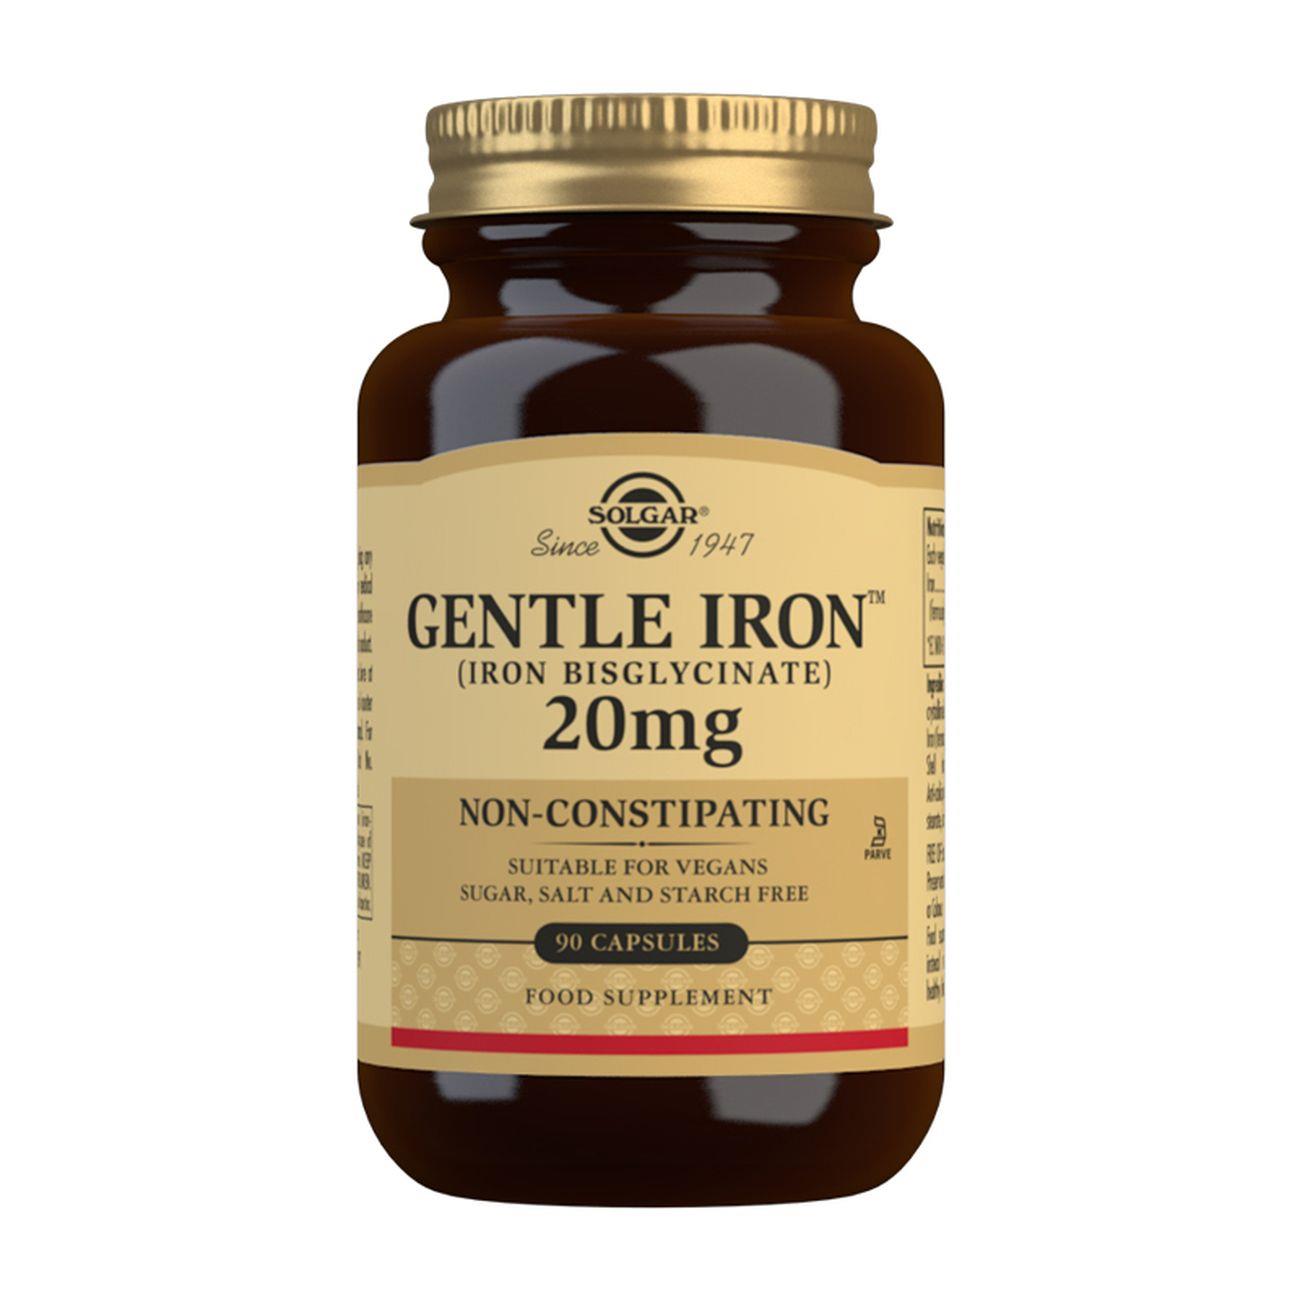 Gentle Iron (Iron Bisglycinate) 20 mg - 90 Vegetable Capsules